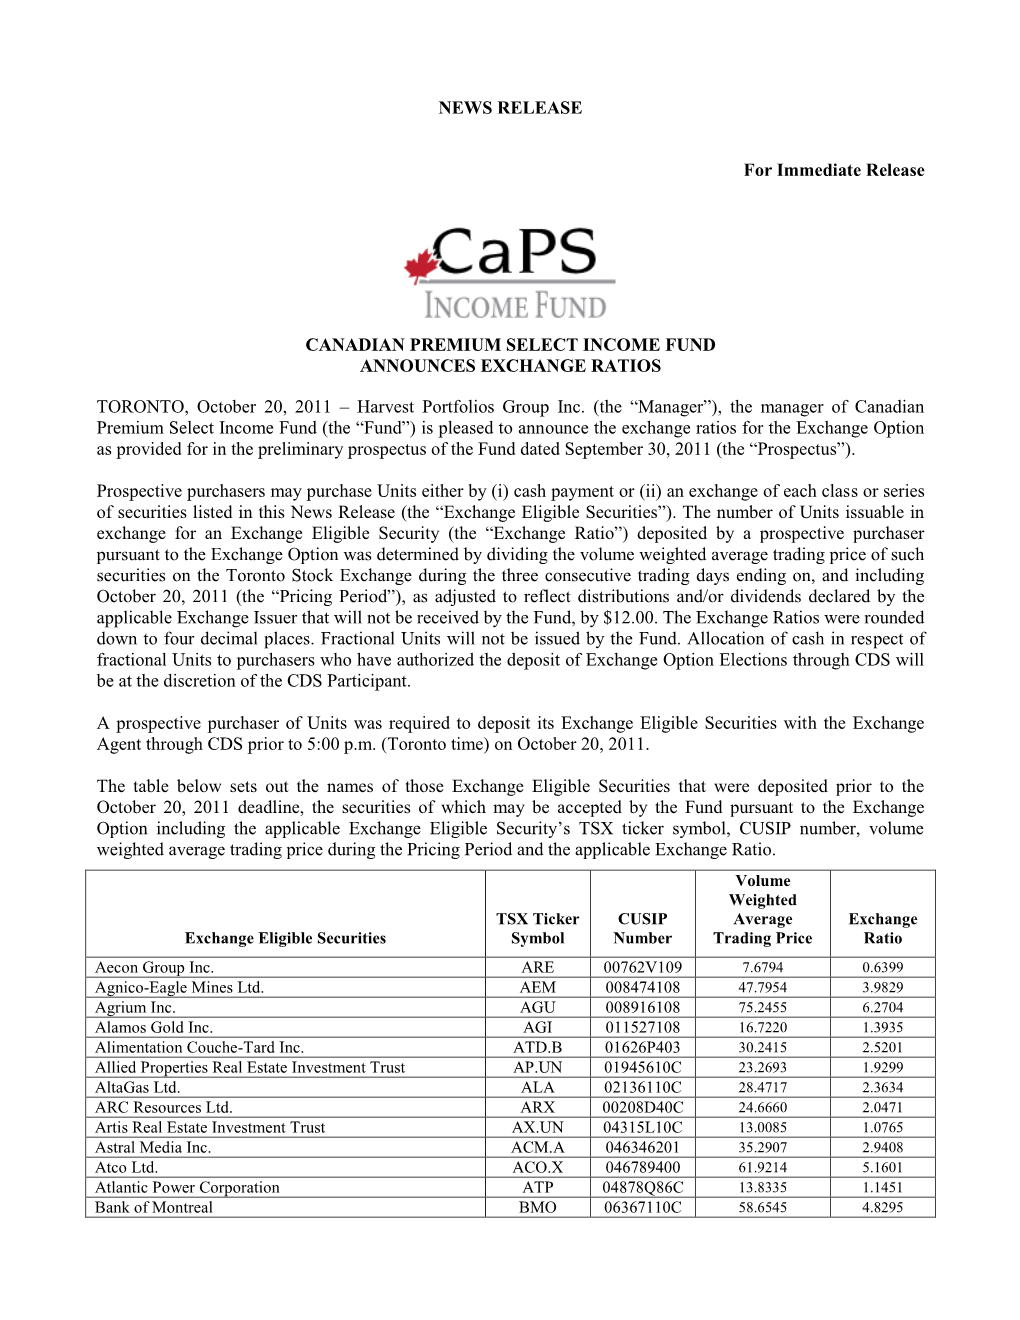 NEWS RELEASE for Immediate Release CANADIAN PREMIUM